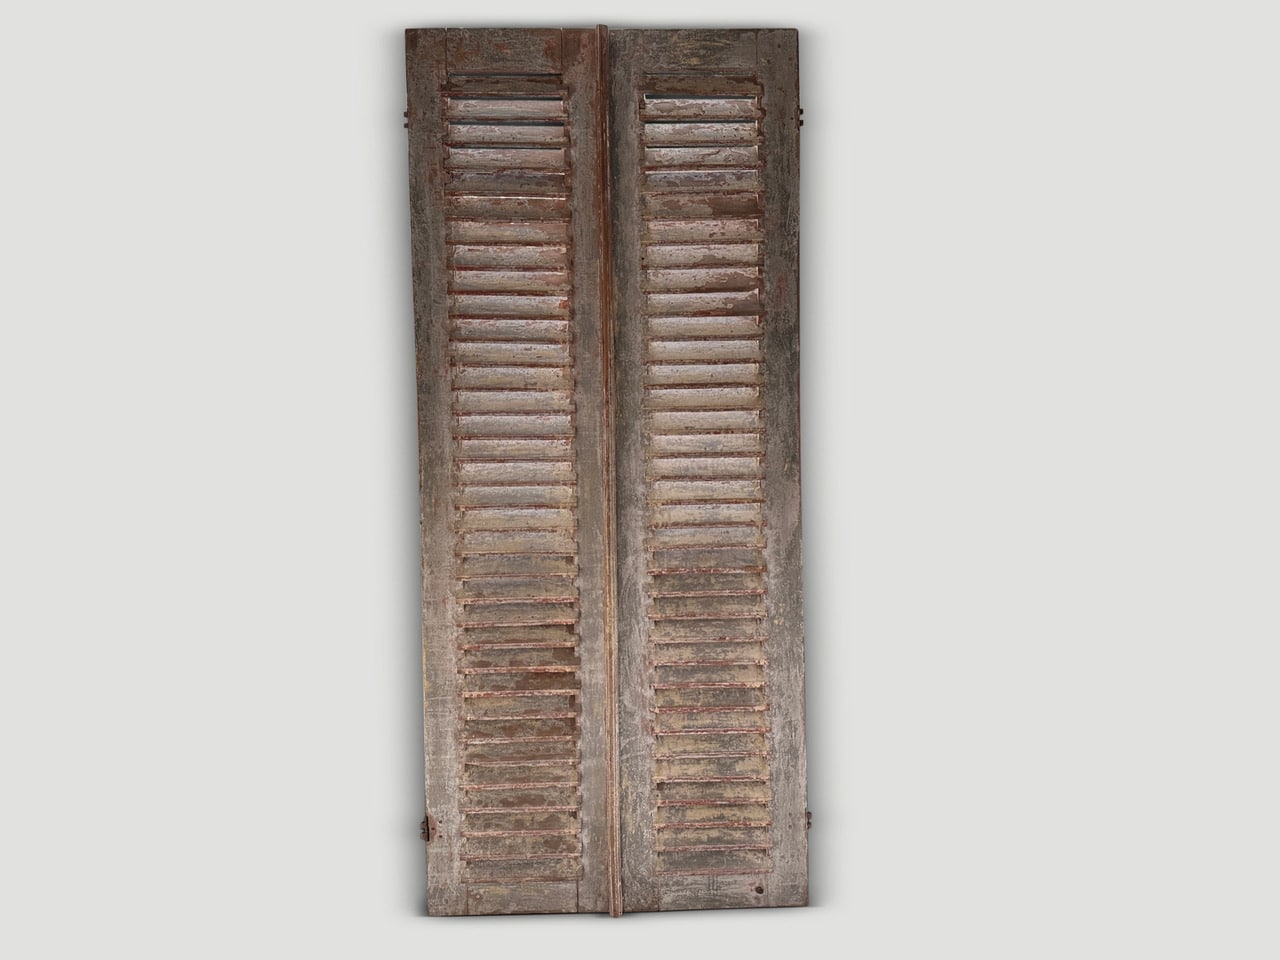 antique shutters with the remnants of the original color